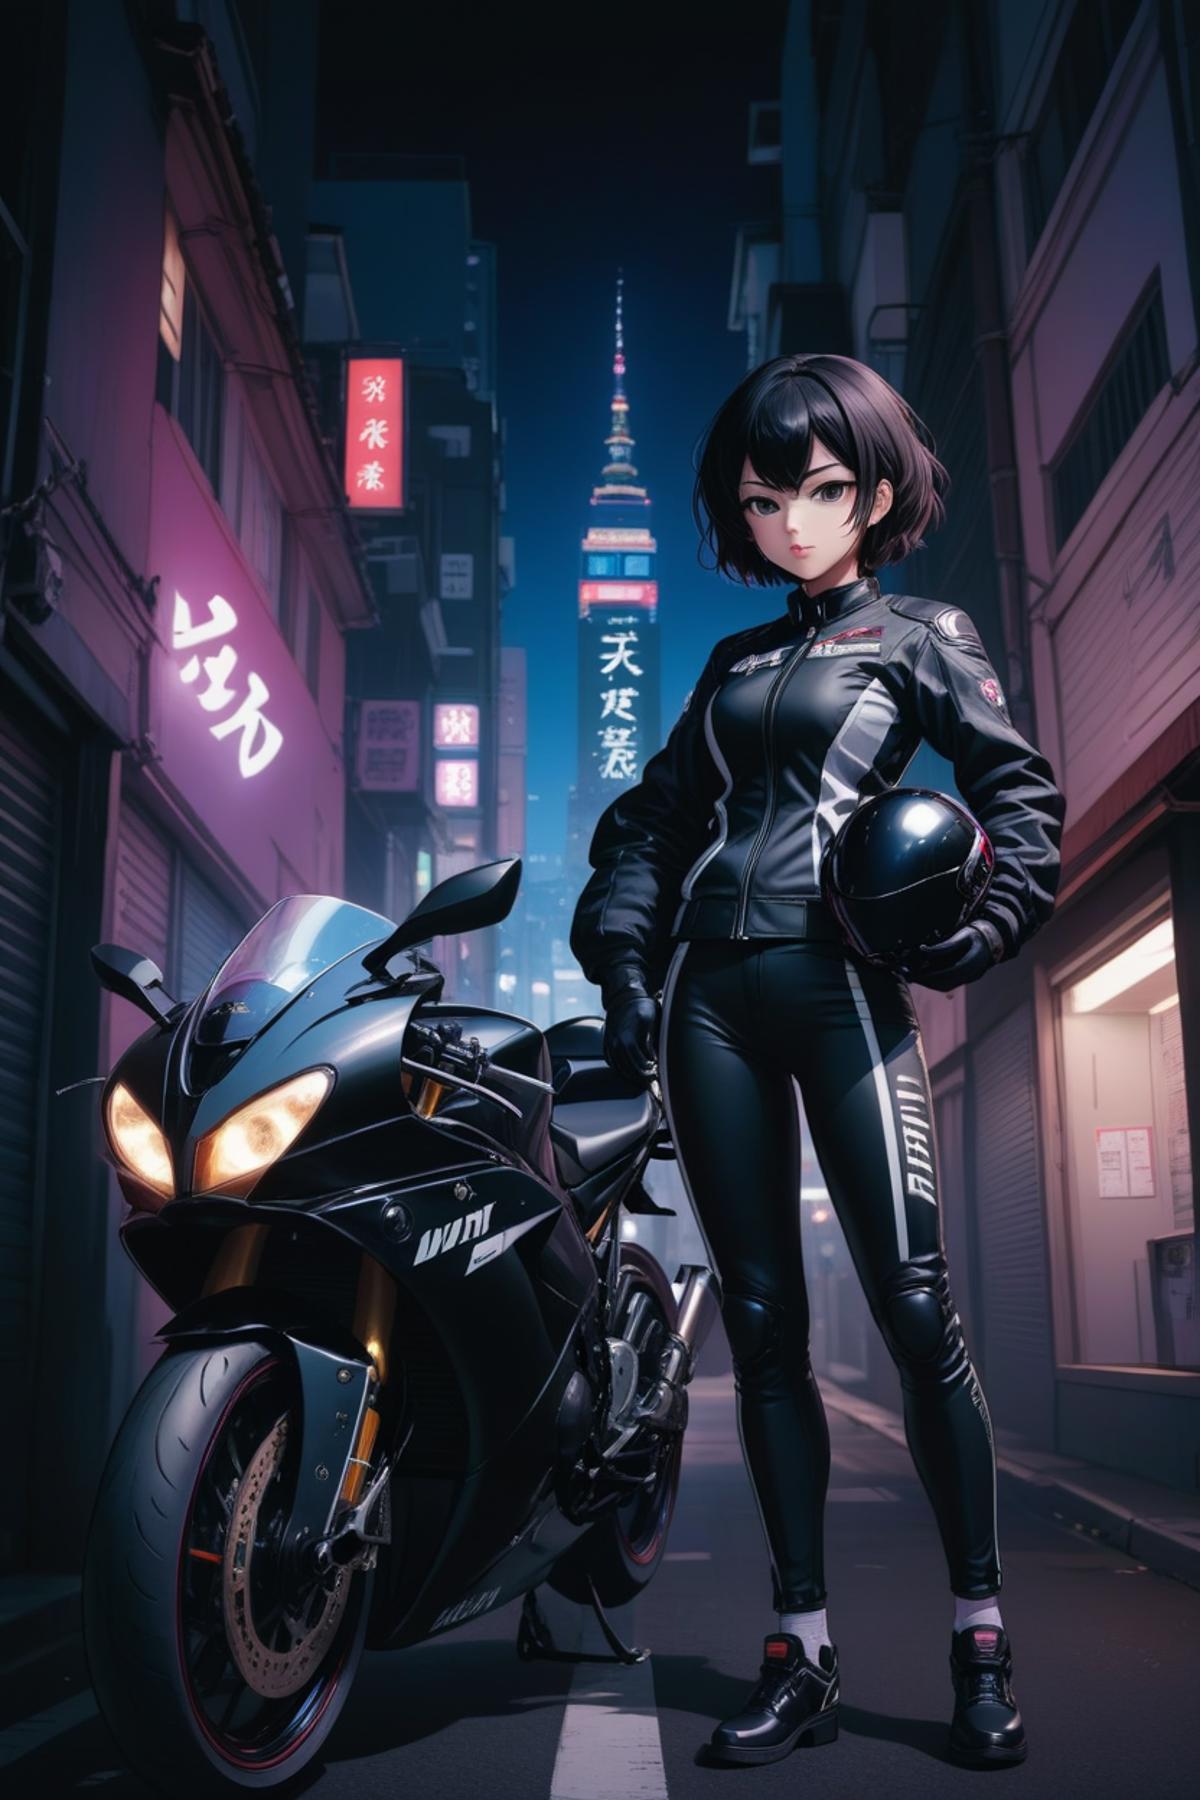 Anime-style girl standing next to a black motorcycle in a city street.